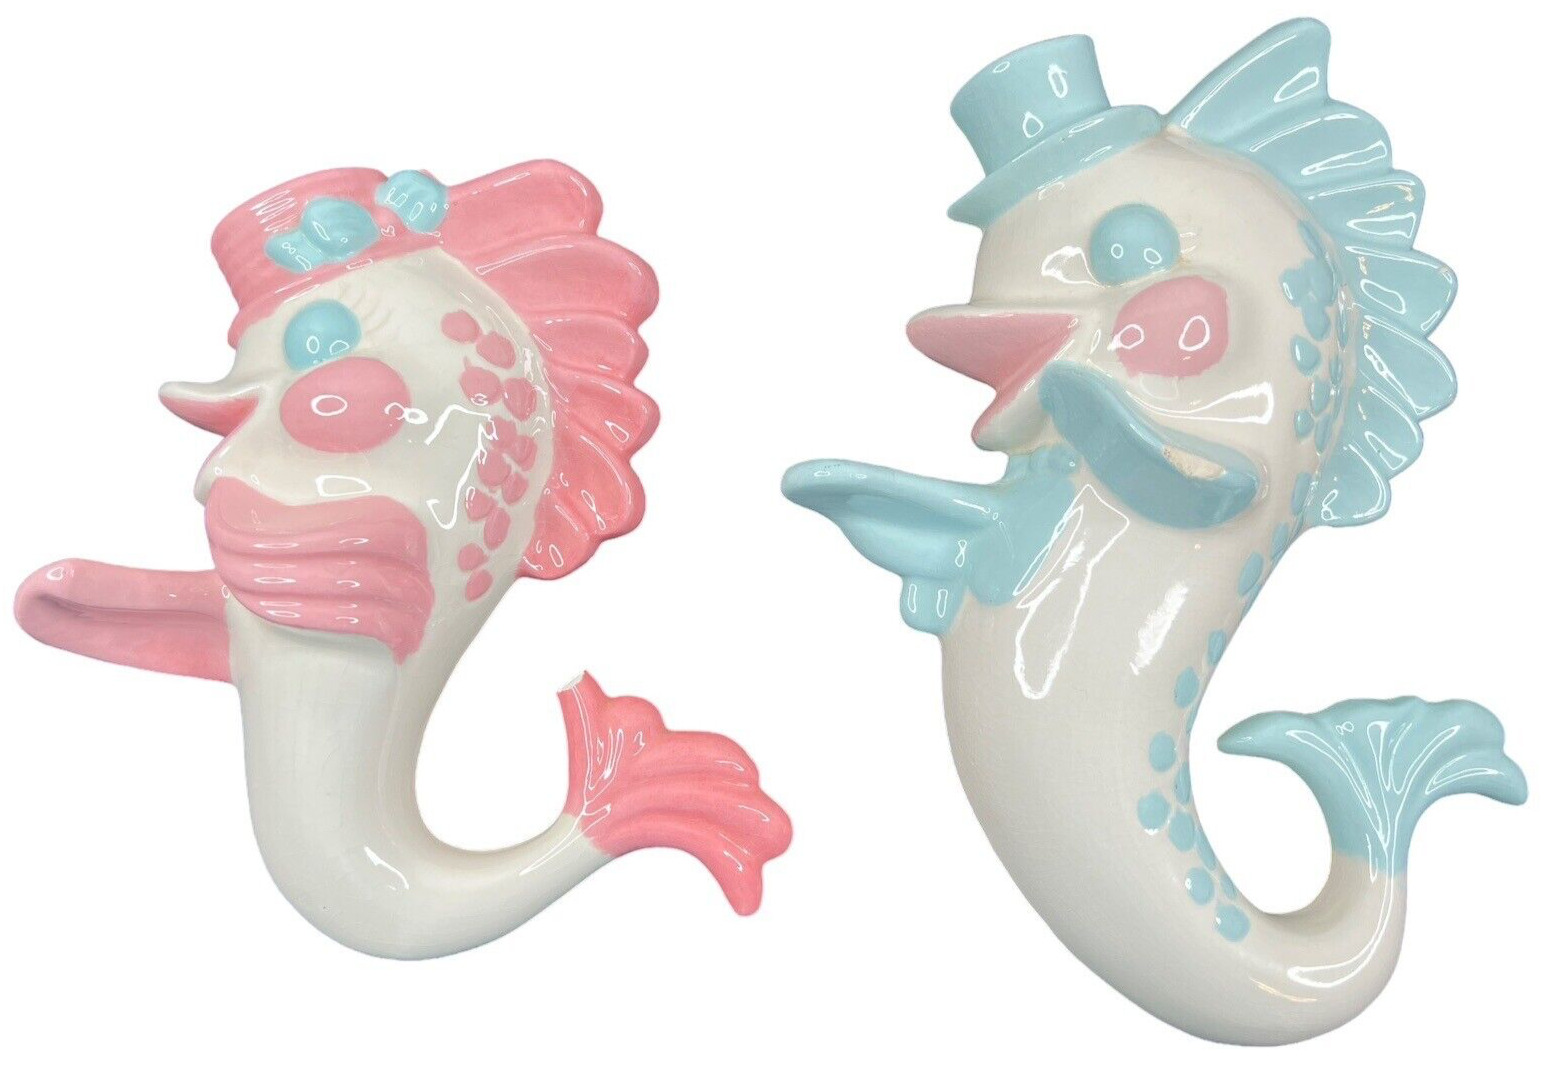 2 Vintage Anthropomorphic Fish Blue Pink in Hats Kitschy Wall Hangings DAMAGED